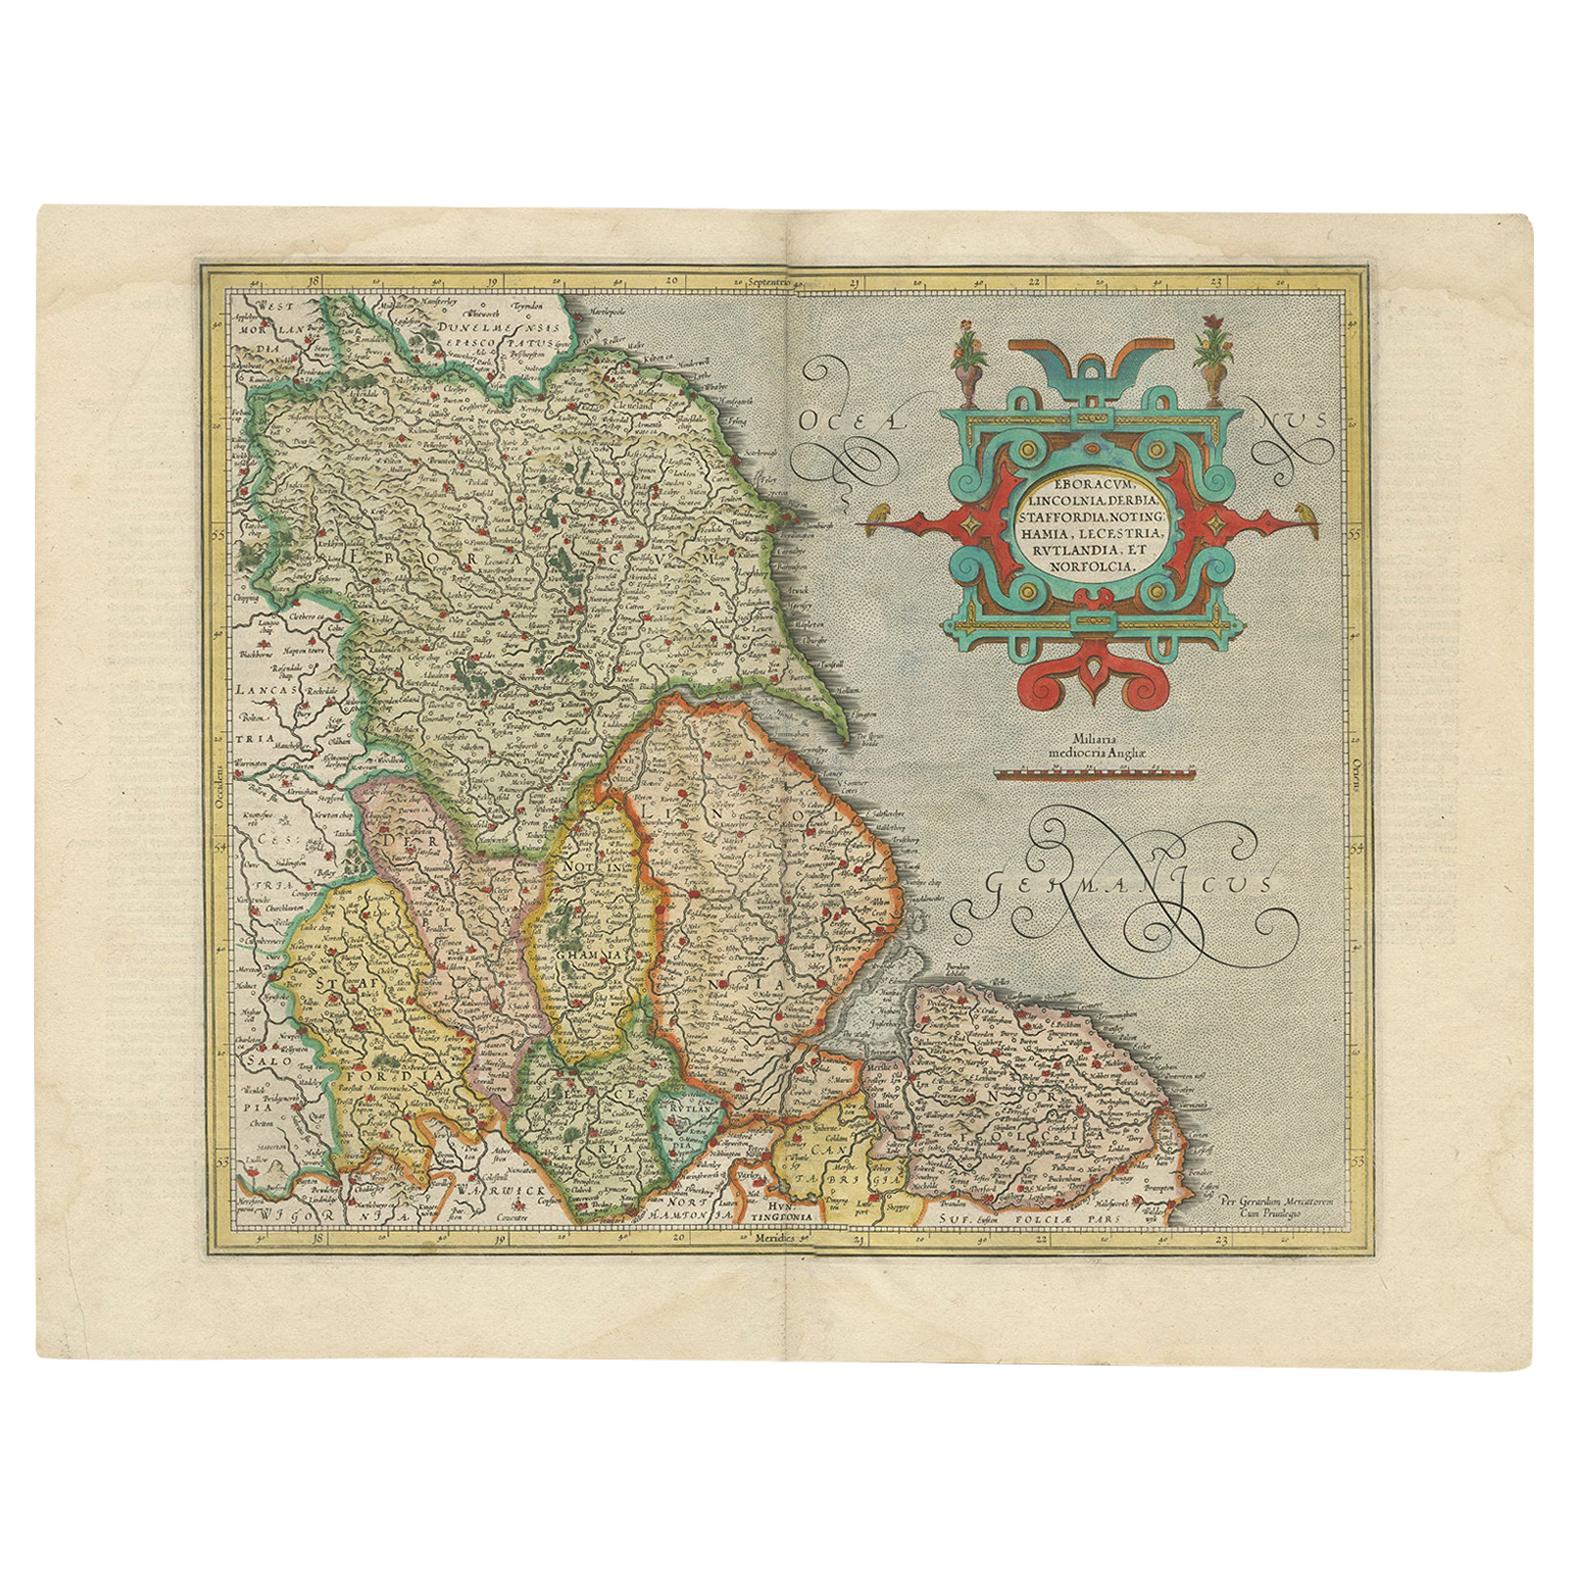 Antique Map of the Northeast of England by Mercator 'circa 1620'